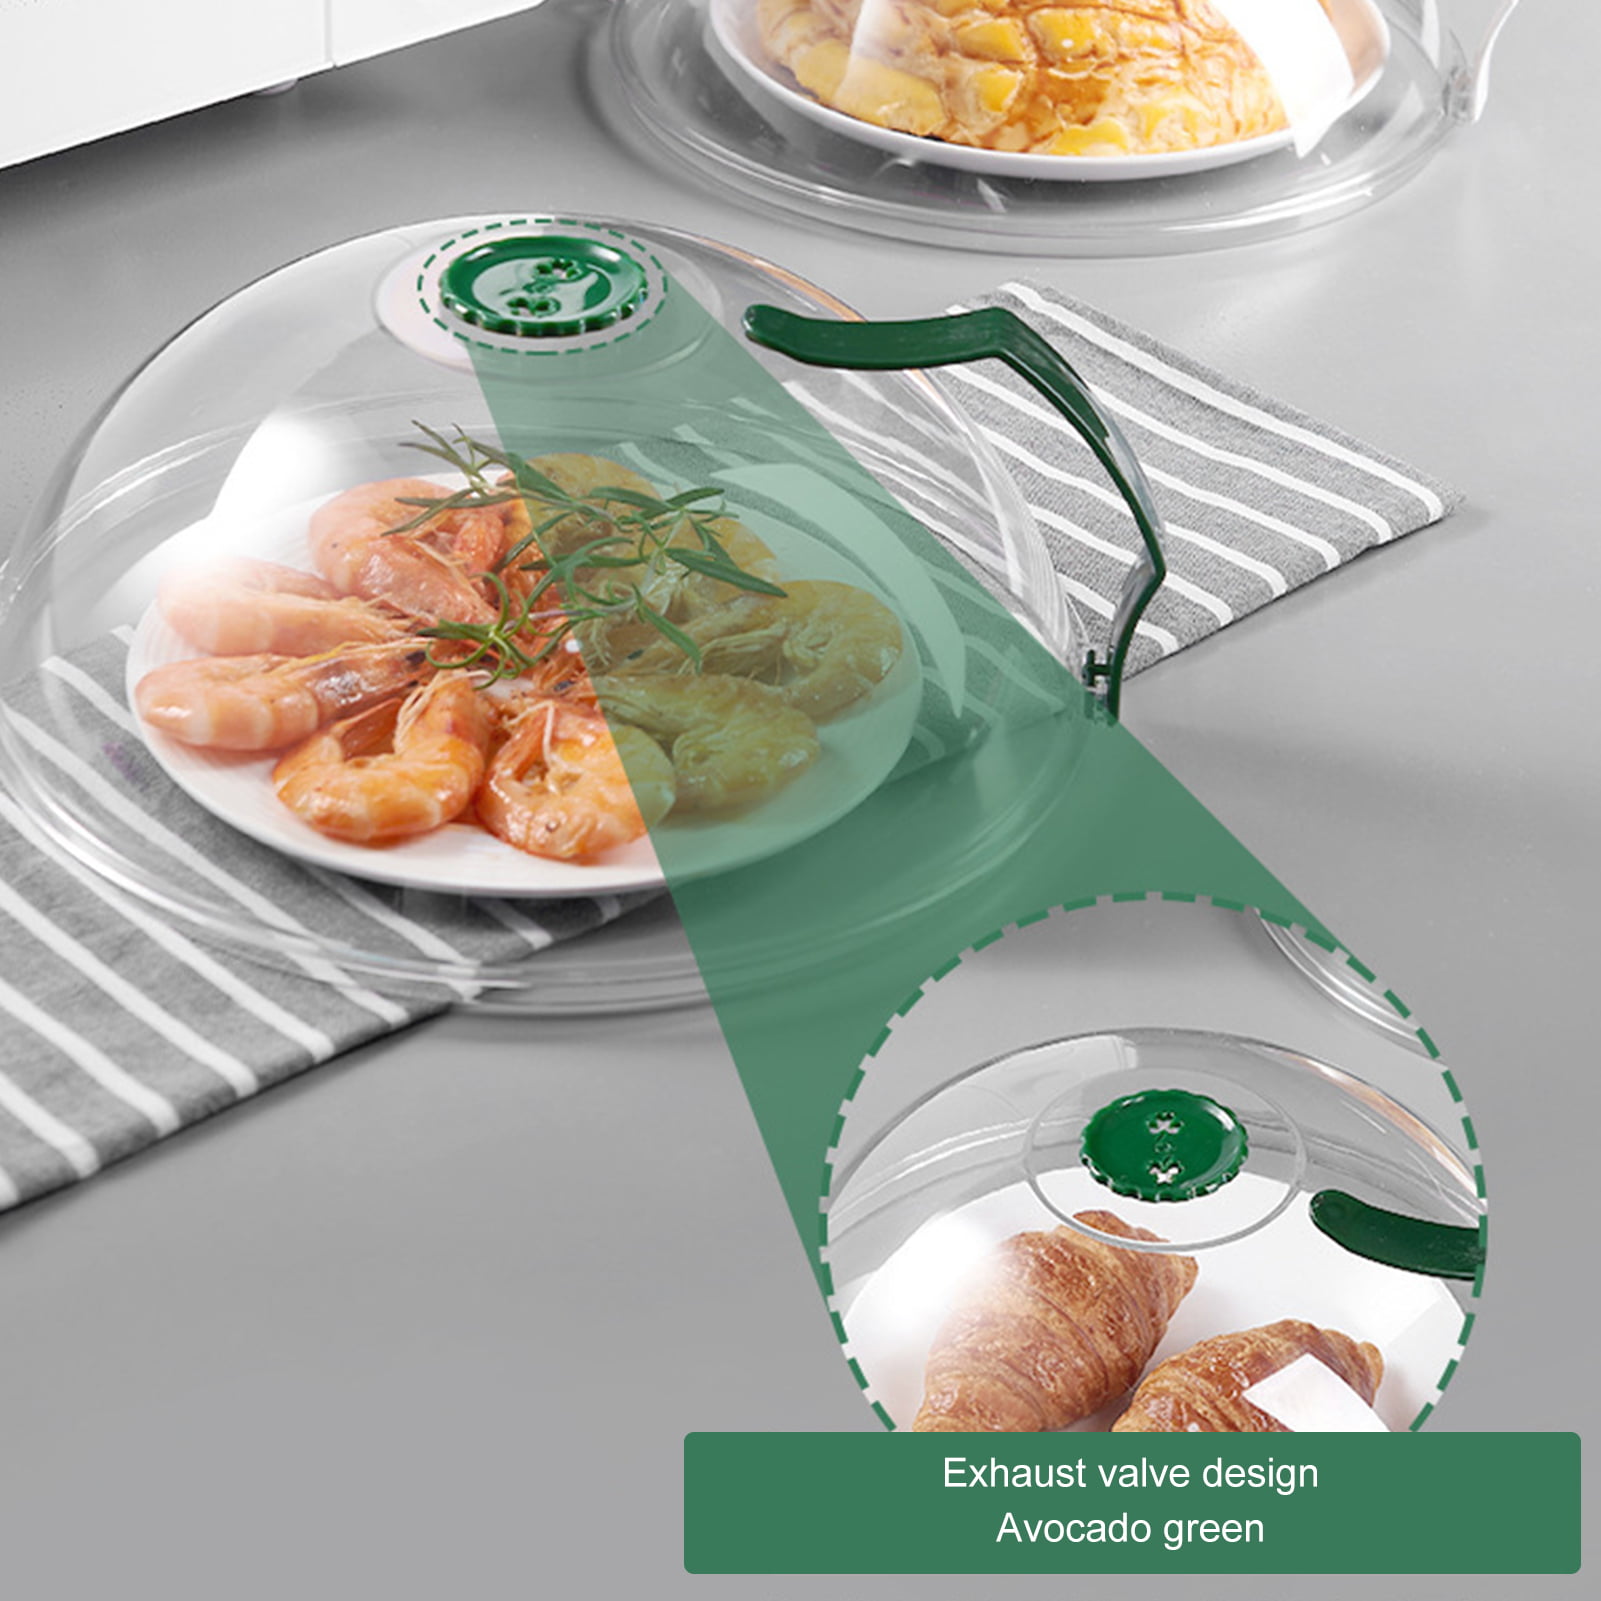 Clear Large Plastic 26cm Food Cover With Steam Vent, Handle